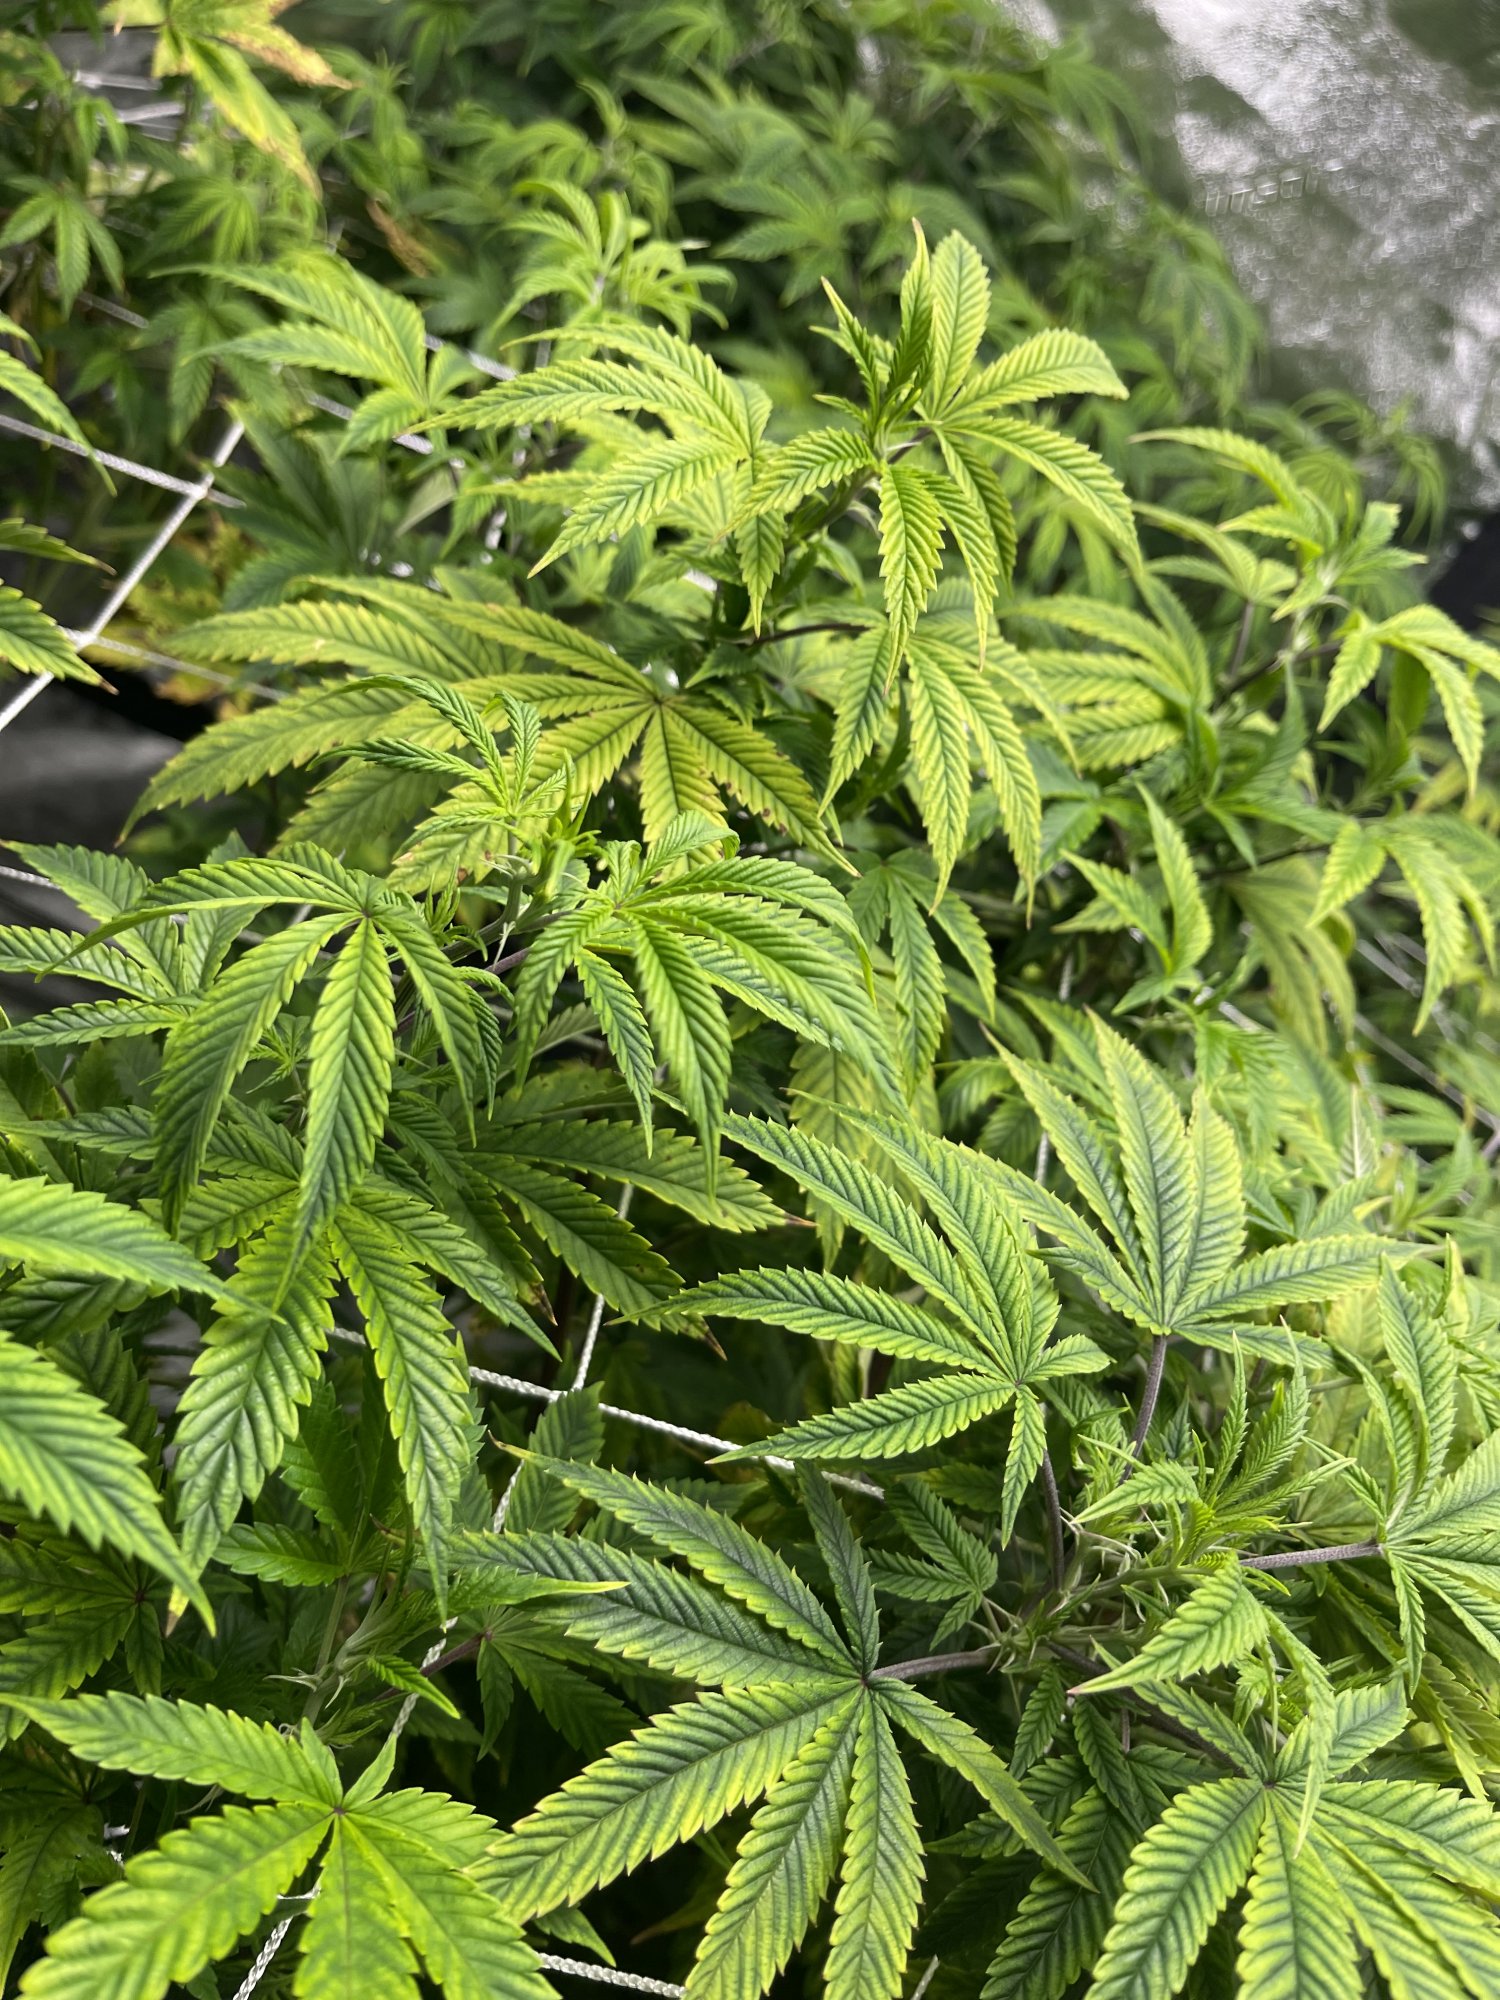 Having issues during veg stage 2